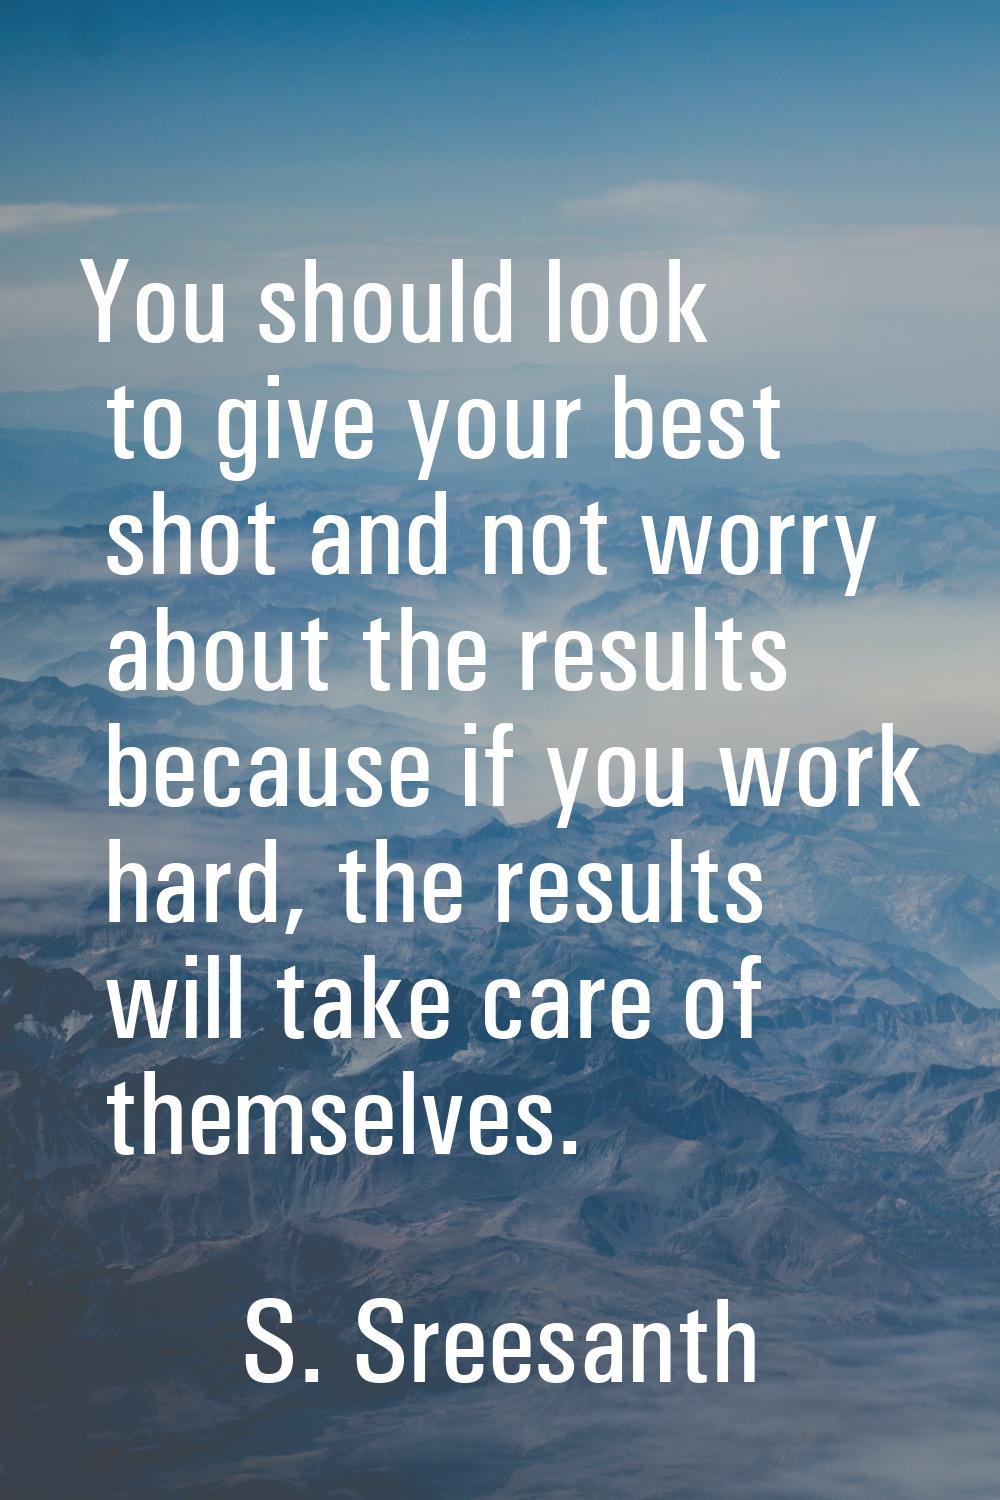 You should look to give your best shot and not worry about the results because if you work hard, th